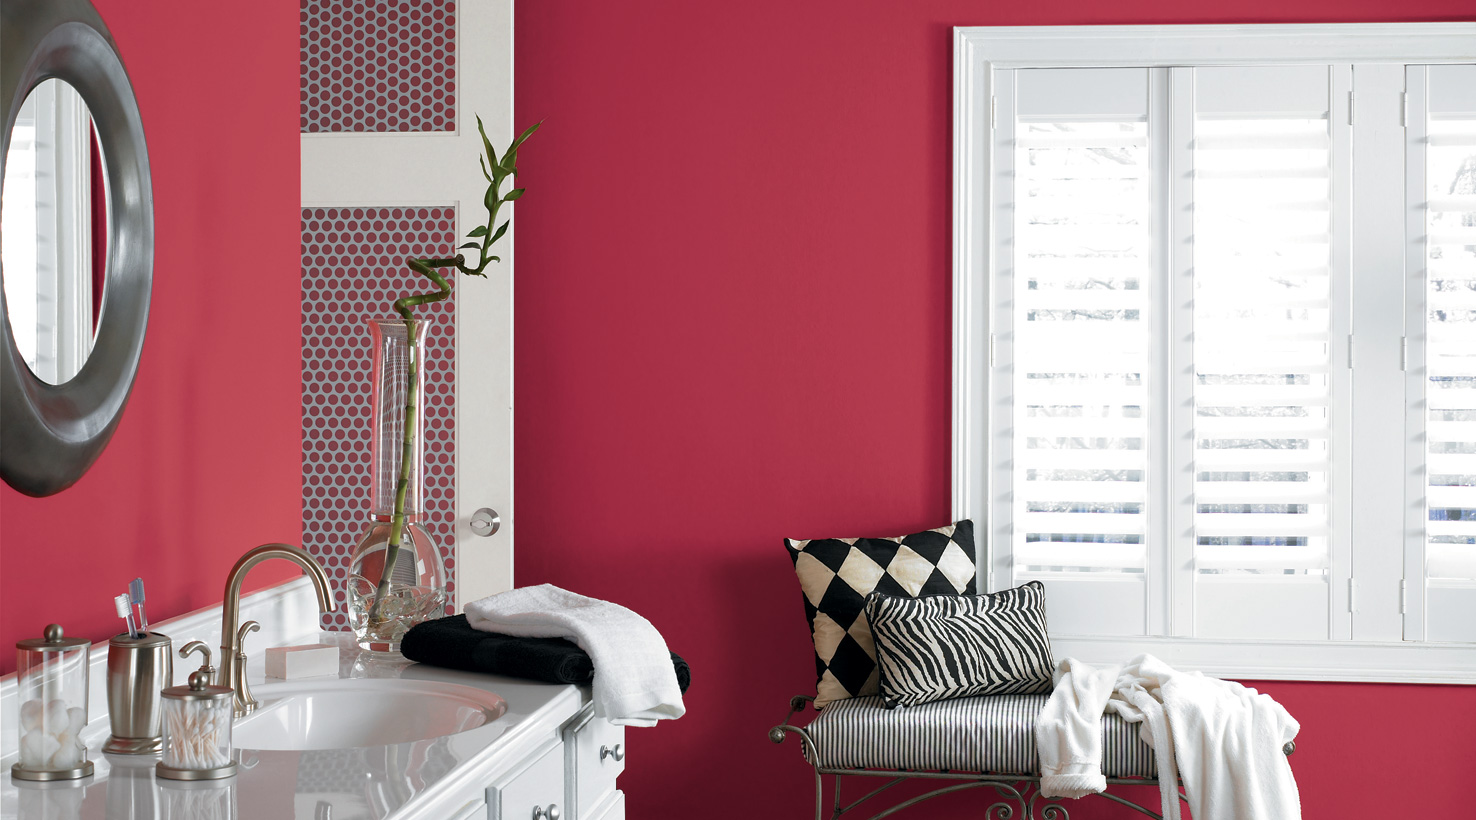  Bathroom  Paint  Color  Ideas  Inspiration Gallery Sherwin  